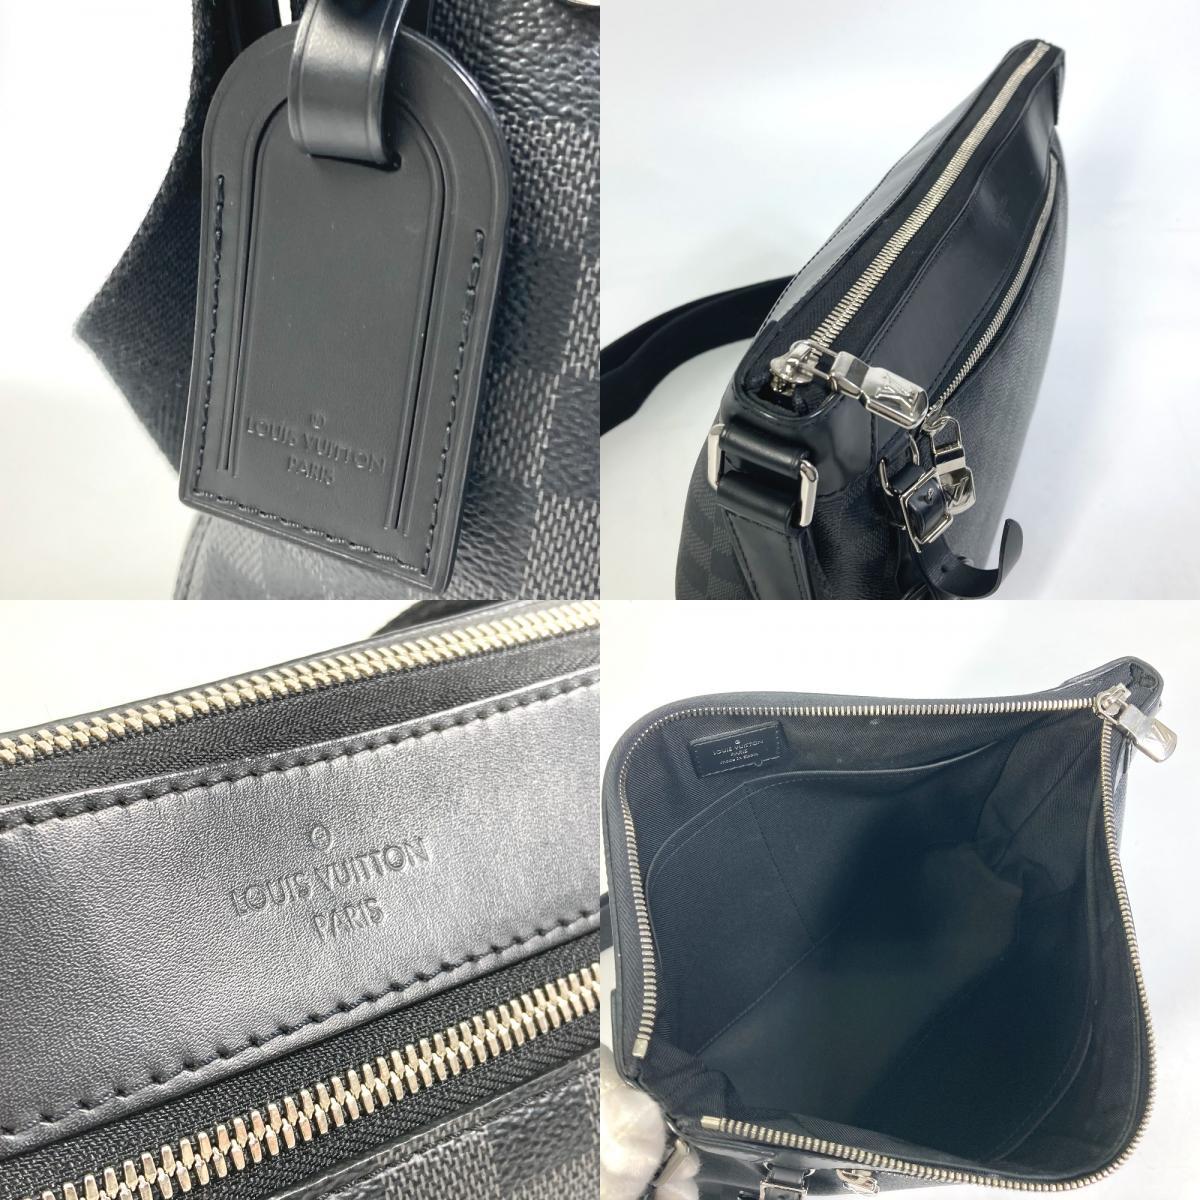 LOUIS VUITTON ルイヴィトン N40003 ダミエグラフィット ミック PM NM